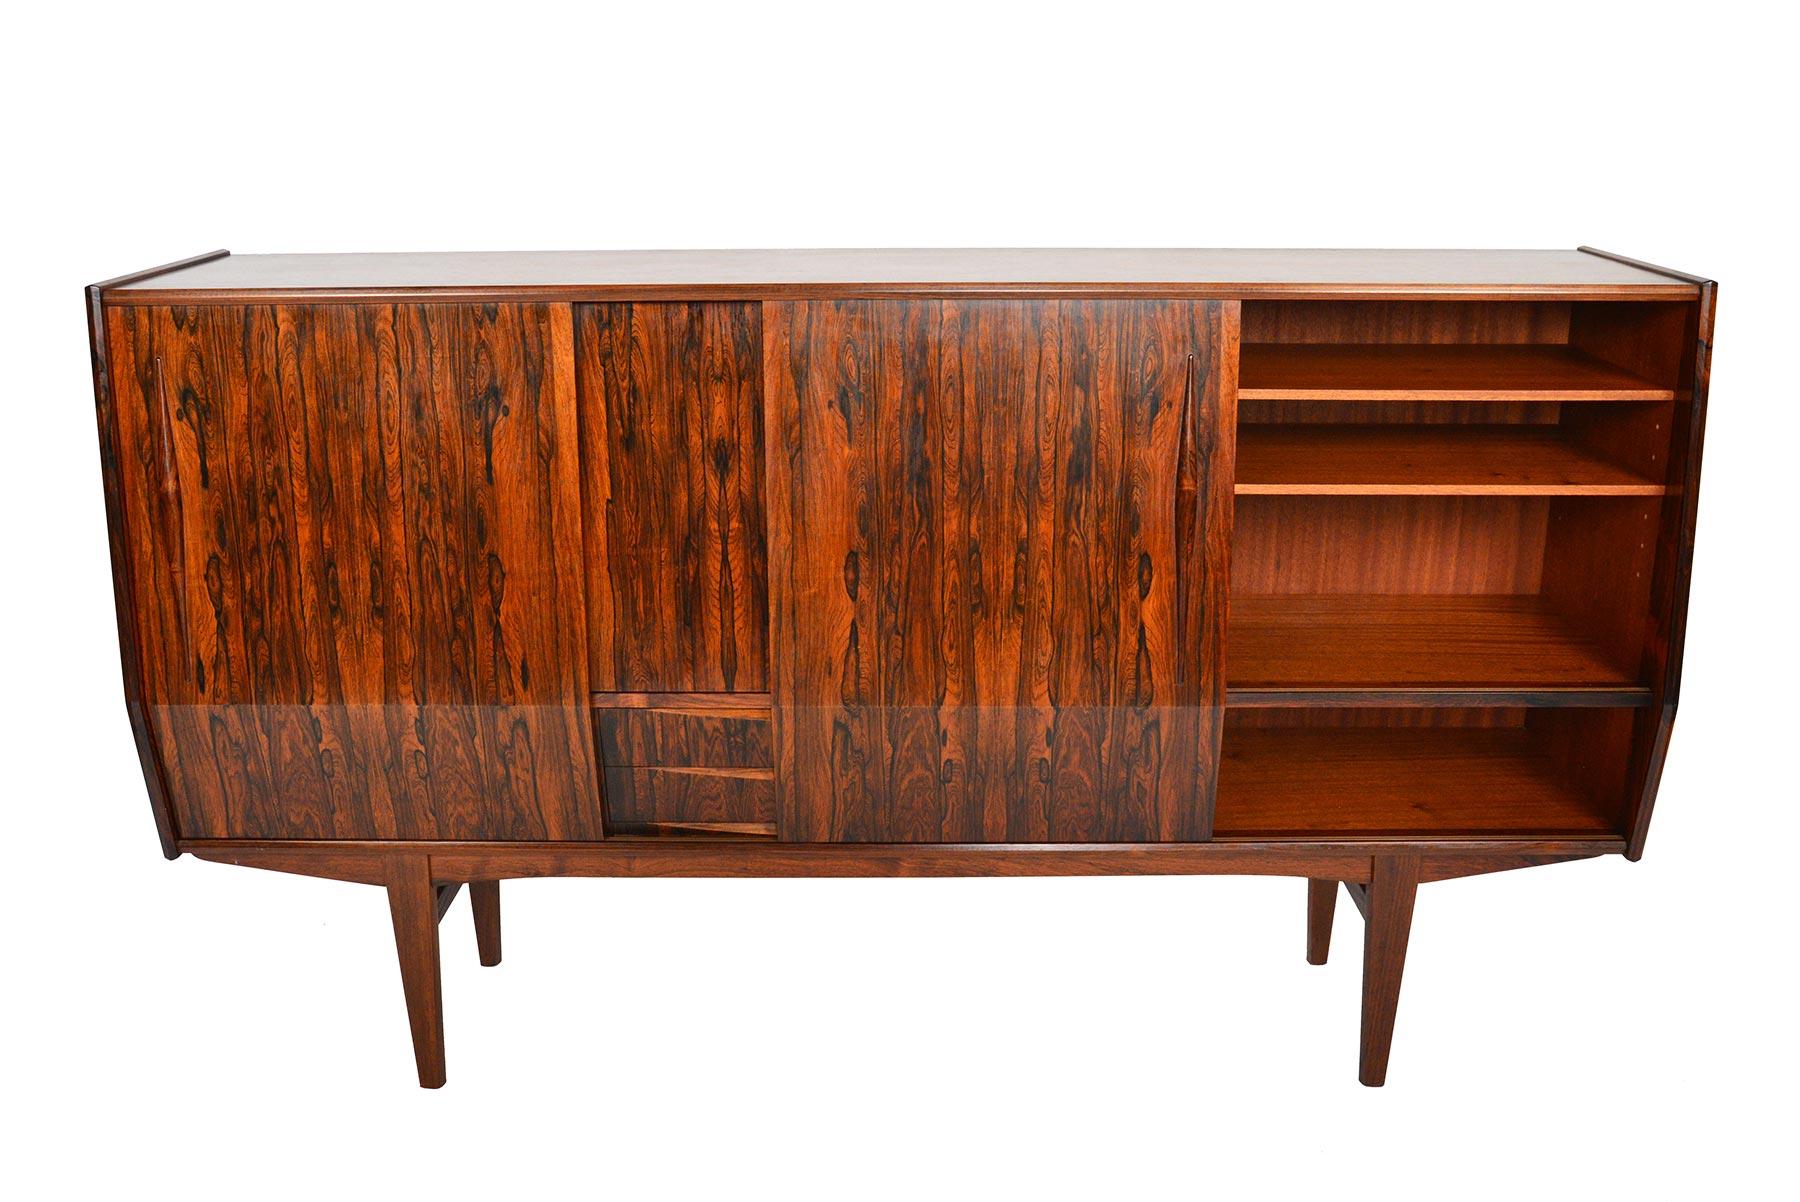 This Danish modern midcentury credenza in rosewood offers exceptional storage in a tall, angular design. Dramatic Brazilian rosewood cathedral grain lines the doors. Four sliding doors open to reveal three bays. Left and right bays offer adjustable